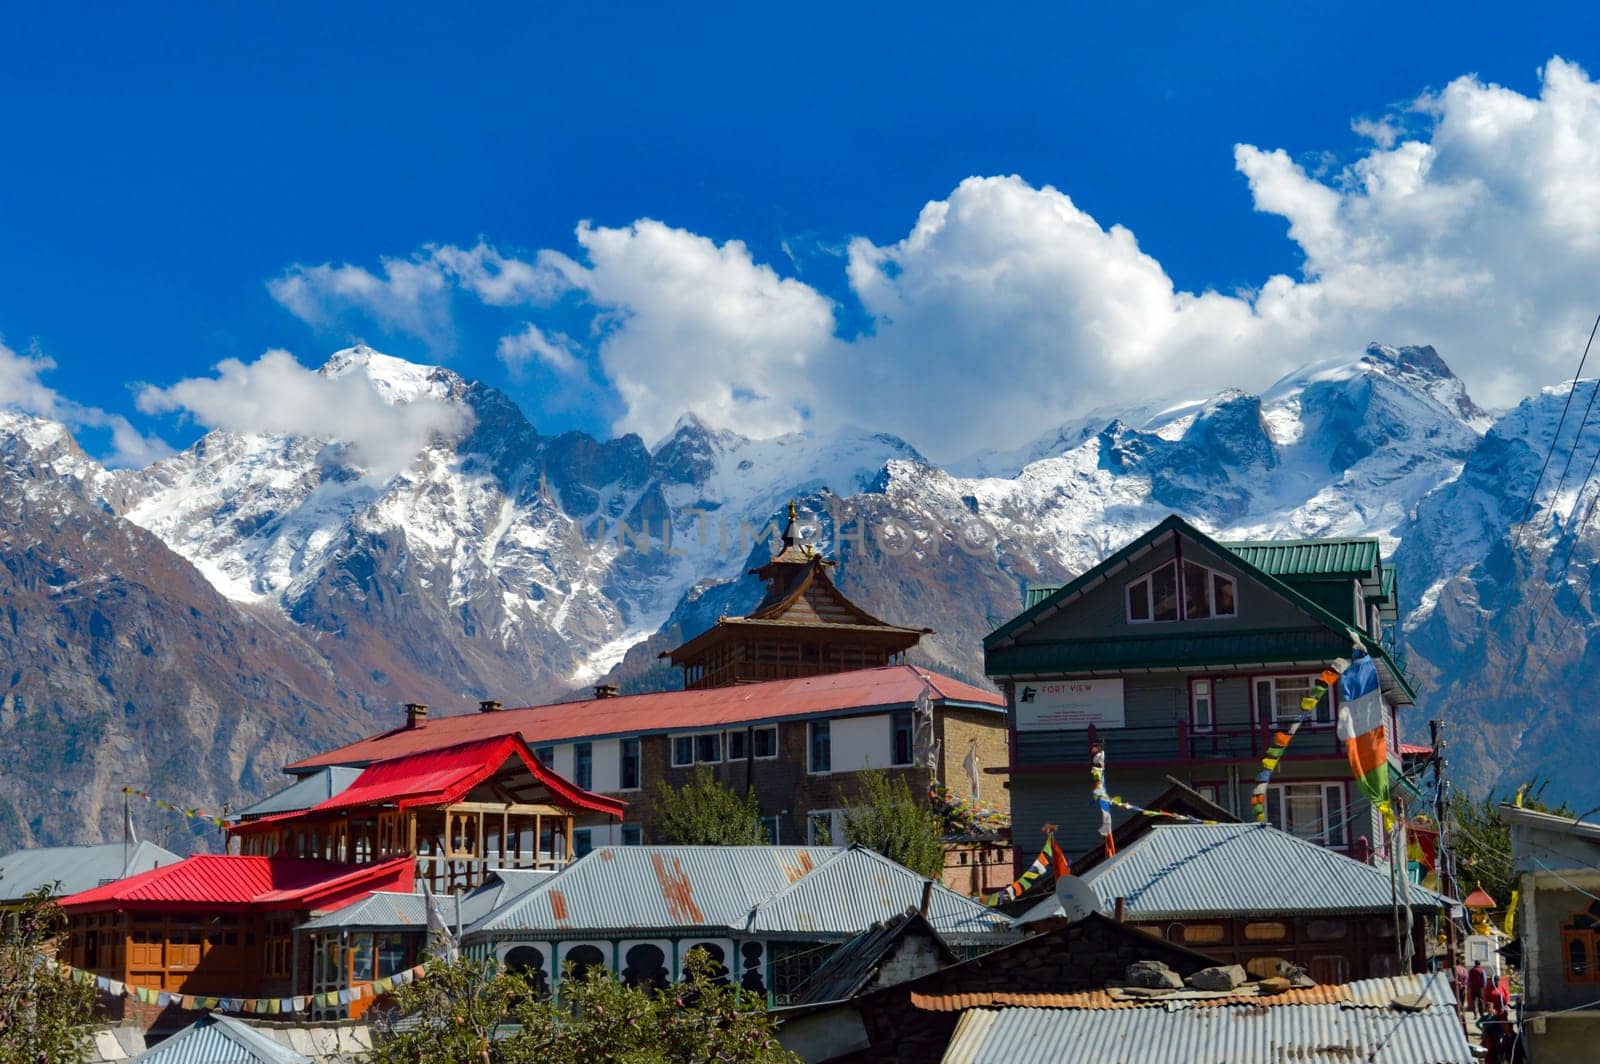 A Buddhist Monastery against show covered mountain with floating clouds in the background. Kaza Himachal Pradesh India South Asia Pacific December 26, 2021 by sudiptabhowmick